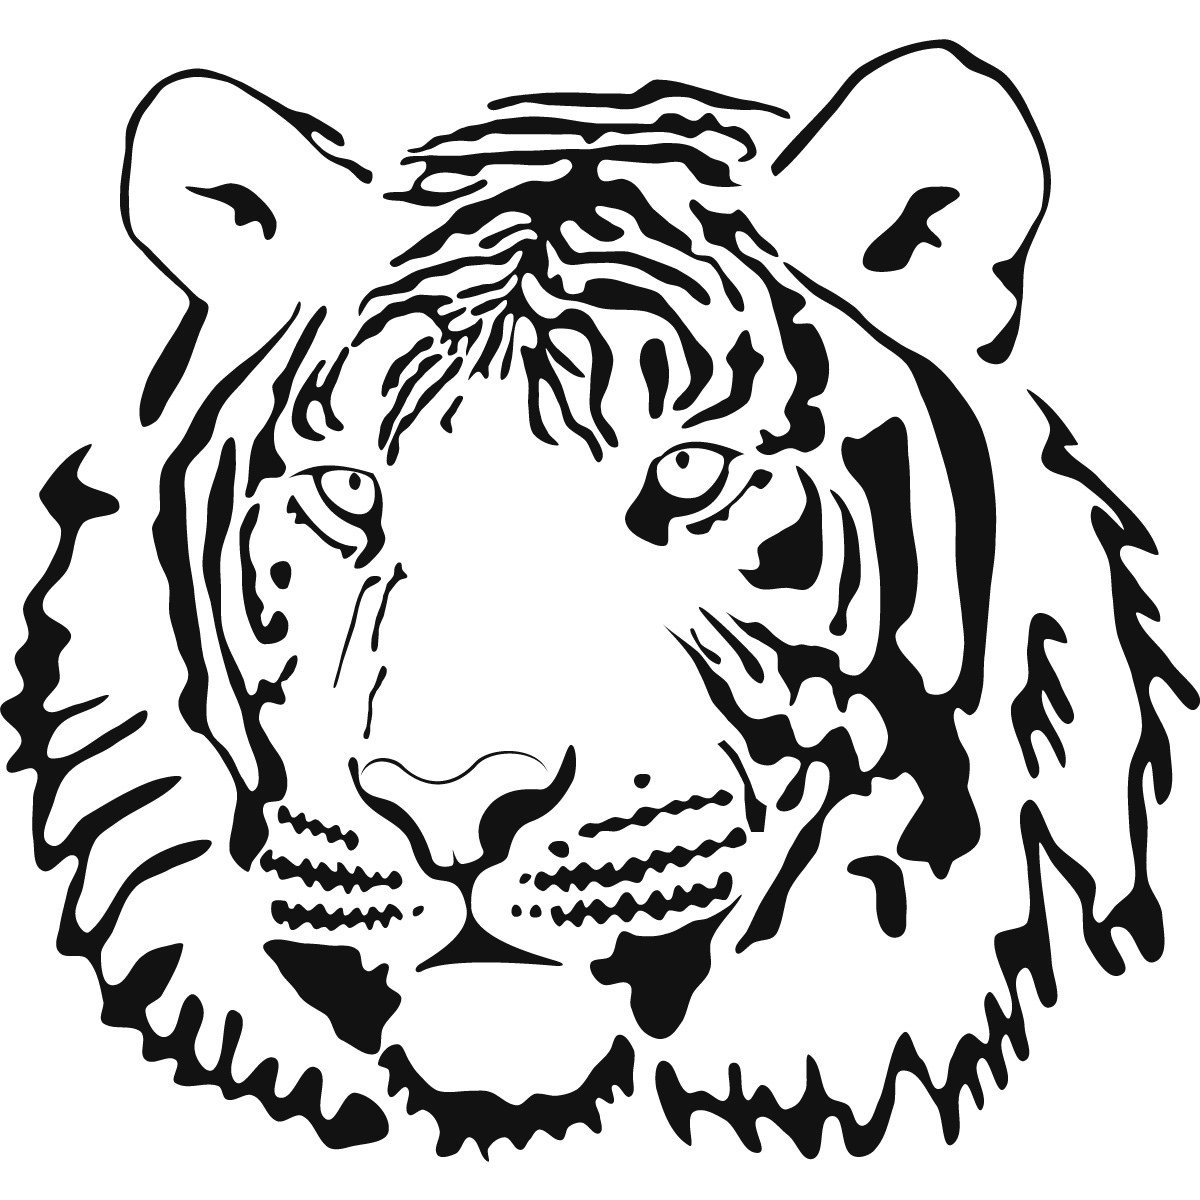 Lion Face Coloring Pages at GetColorings.com | Free printable colorings